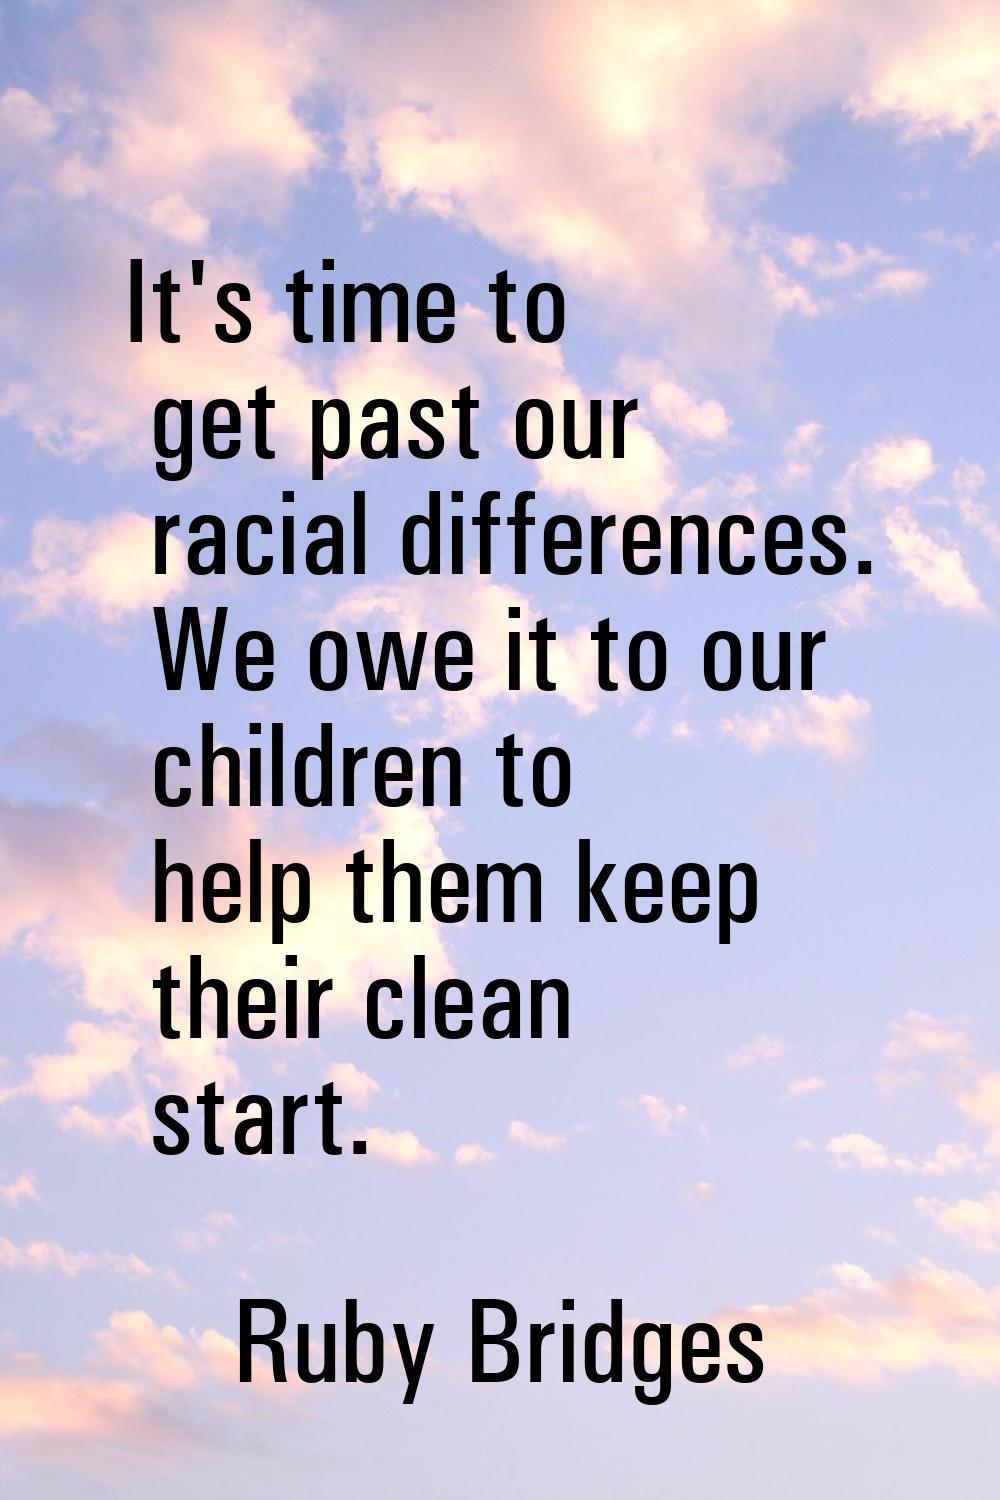 It's time to get past our racial differences. We owe it to our children to help them keep their cle